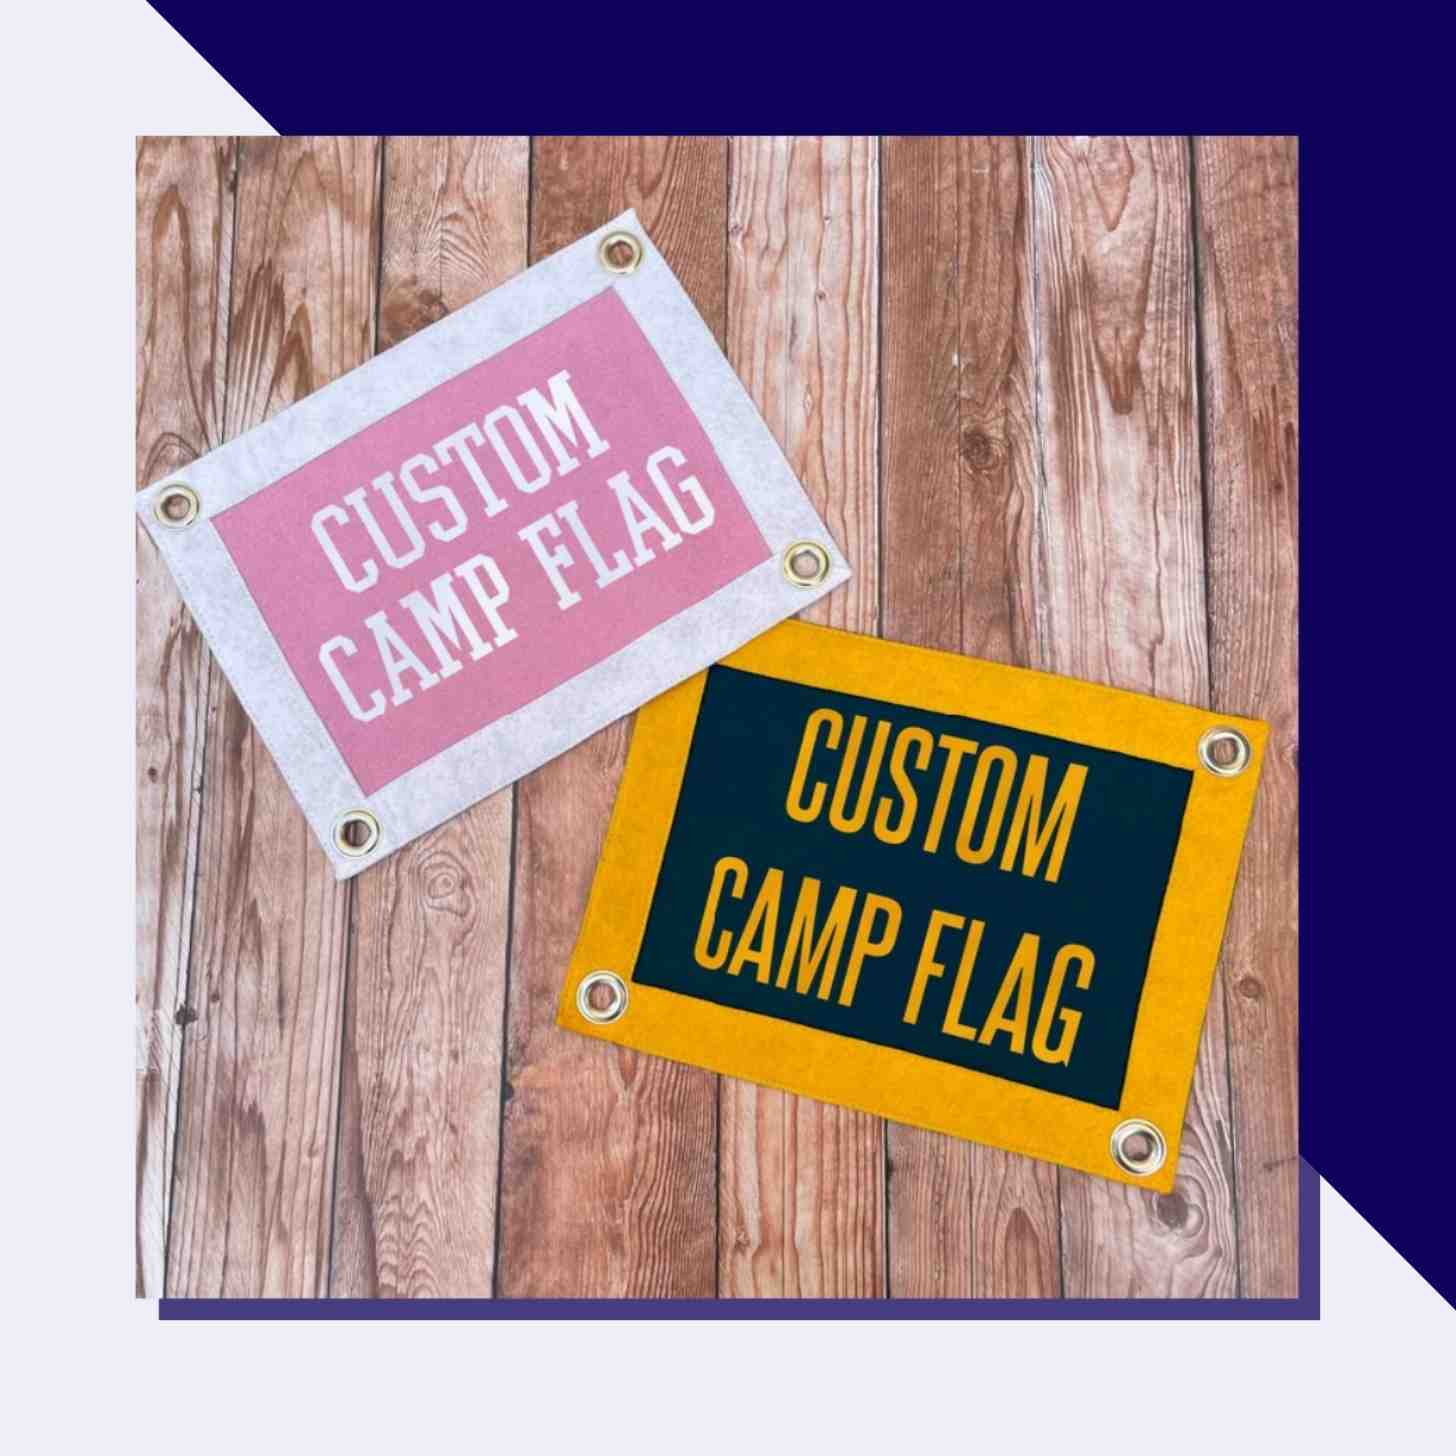 Two Customizable Camp Flags. The One On The Left Is White And Pink. The One On The Right Is Yellow And Green